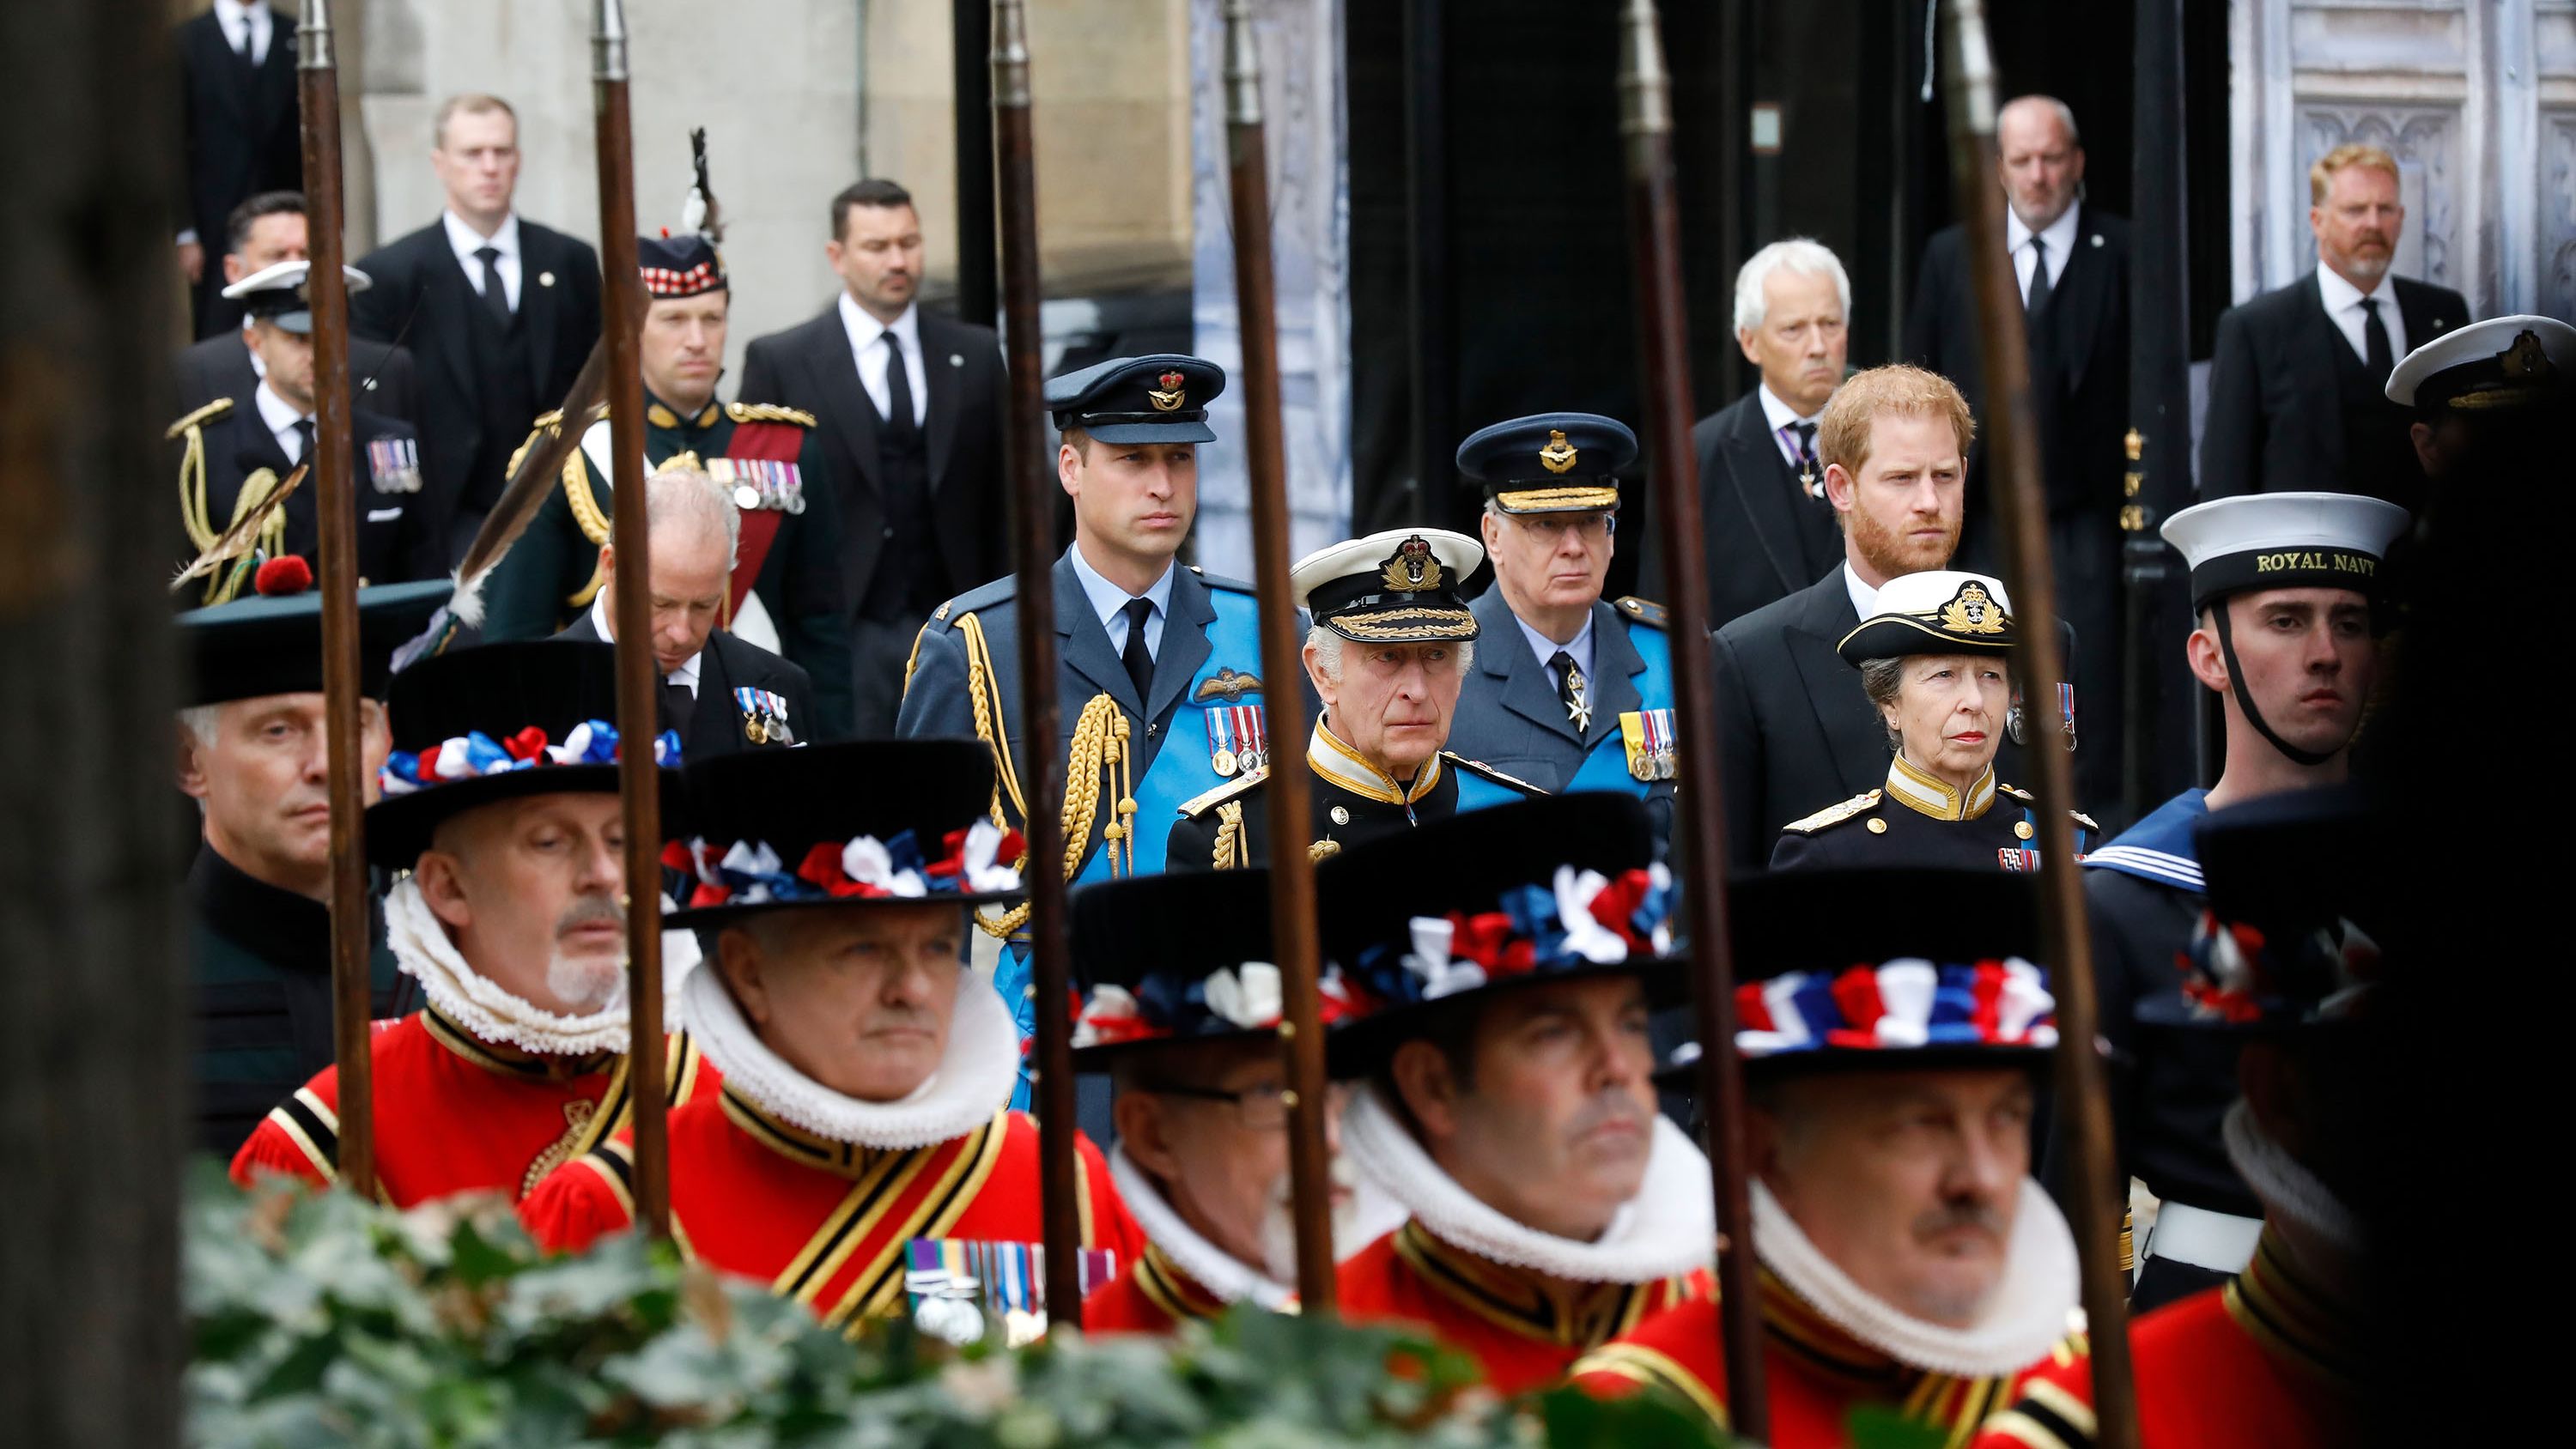 William joins his dad, brother and other members of the royal family during <a href="http://www.cnn.com/2022/09/19/uk/gallery/queen-elizabeth-ii-funeral/index.html" target="_blank">the Queen's state funeral</a> in September 2022.